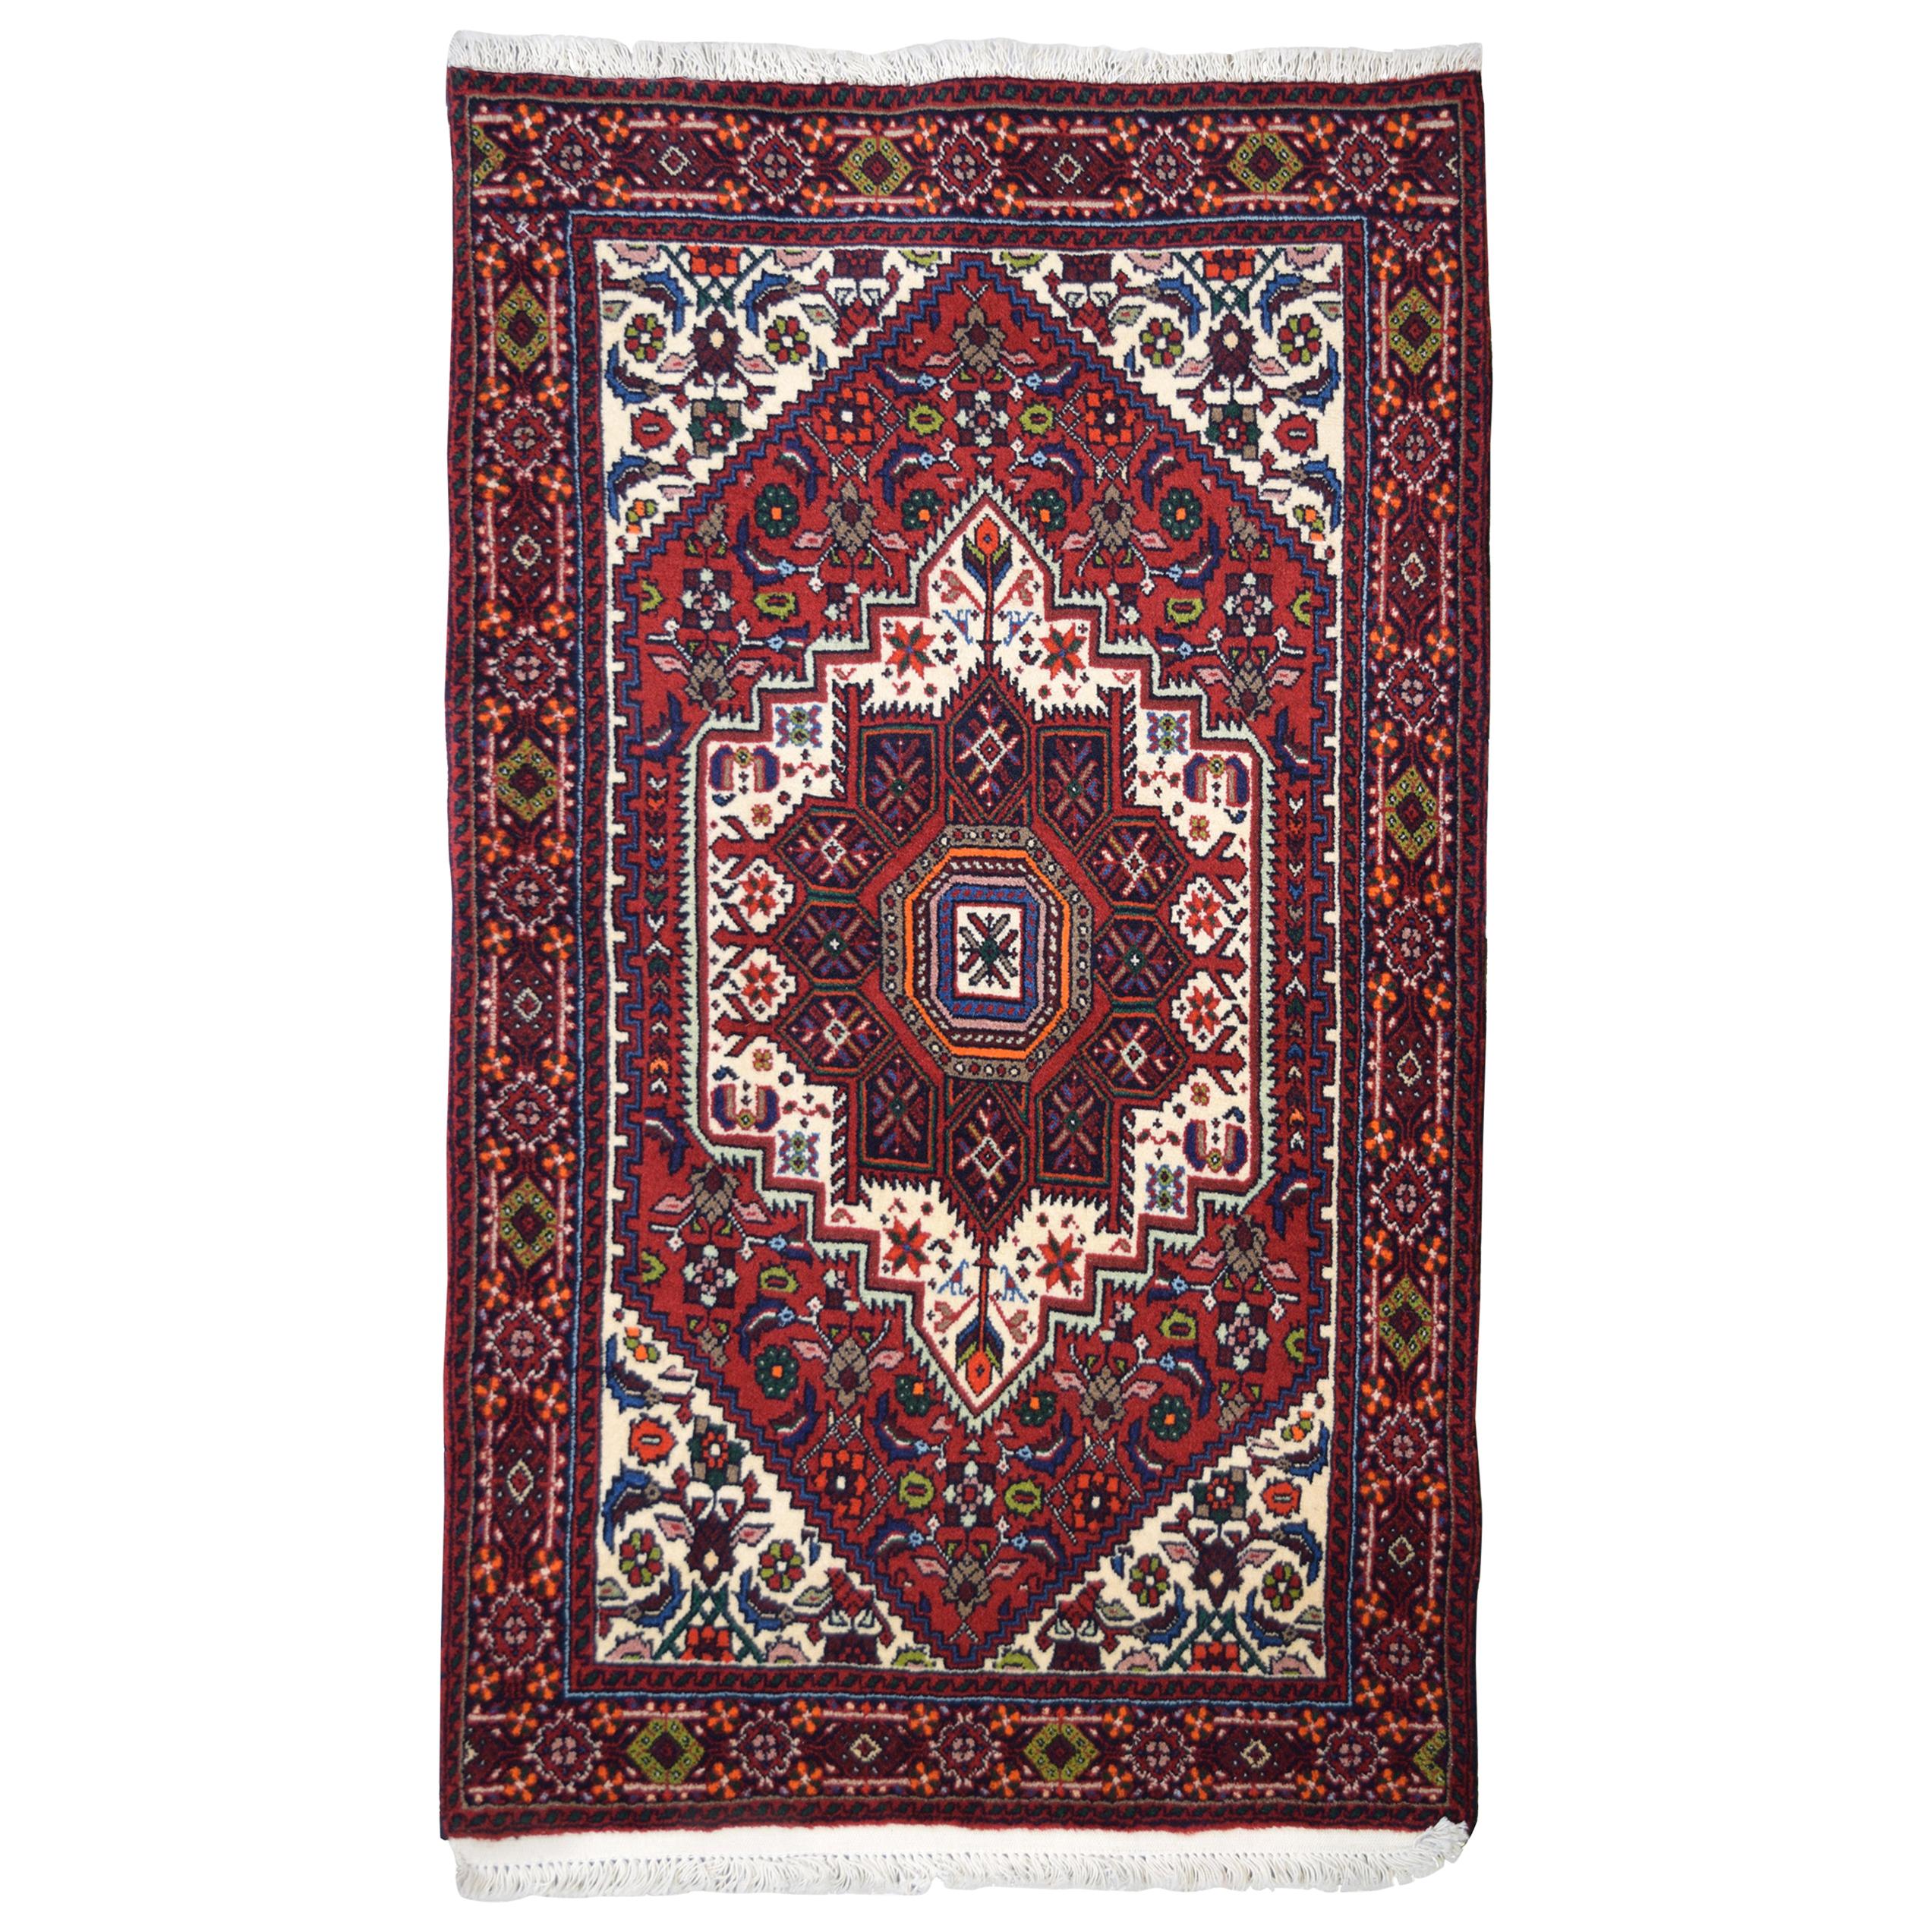 Traditional 1950s Persian Gholtogh Rug, 3' x 4'